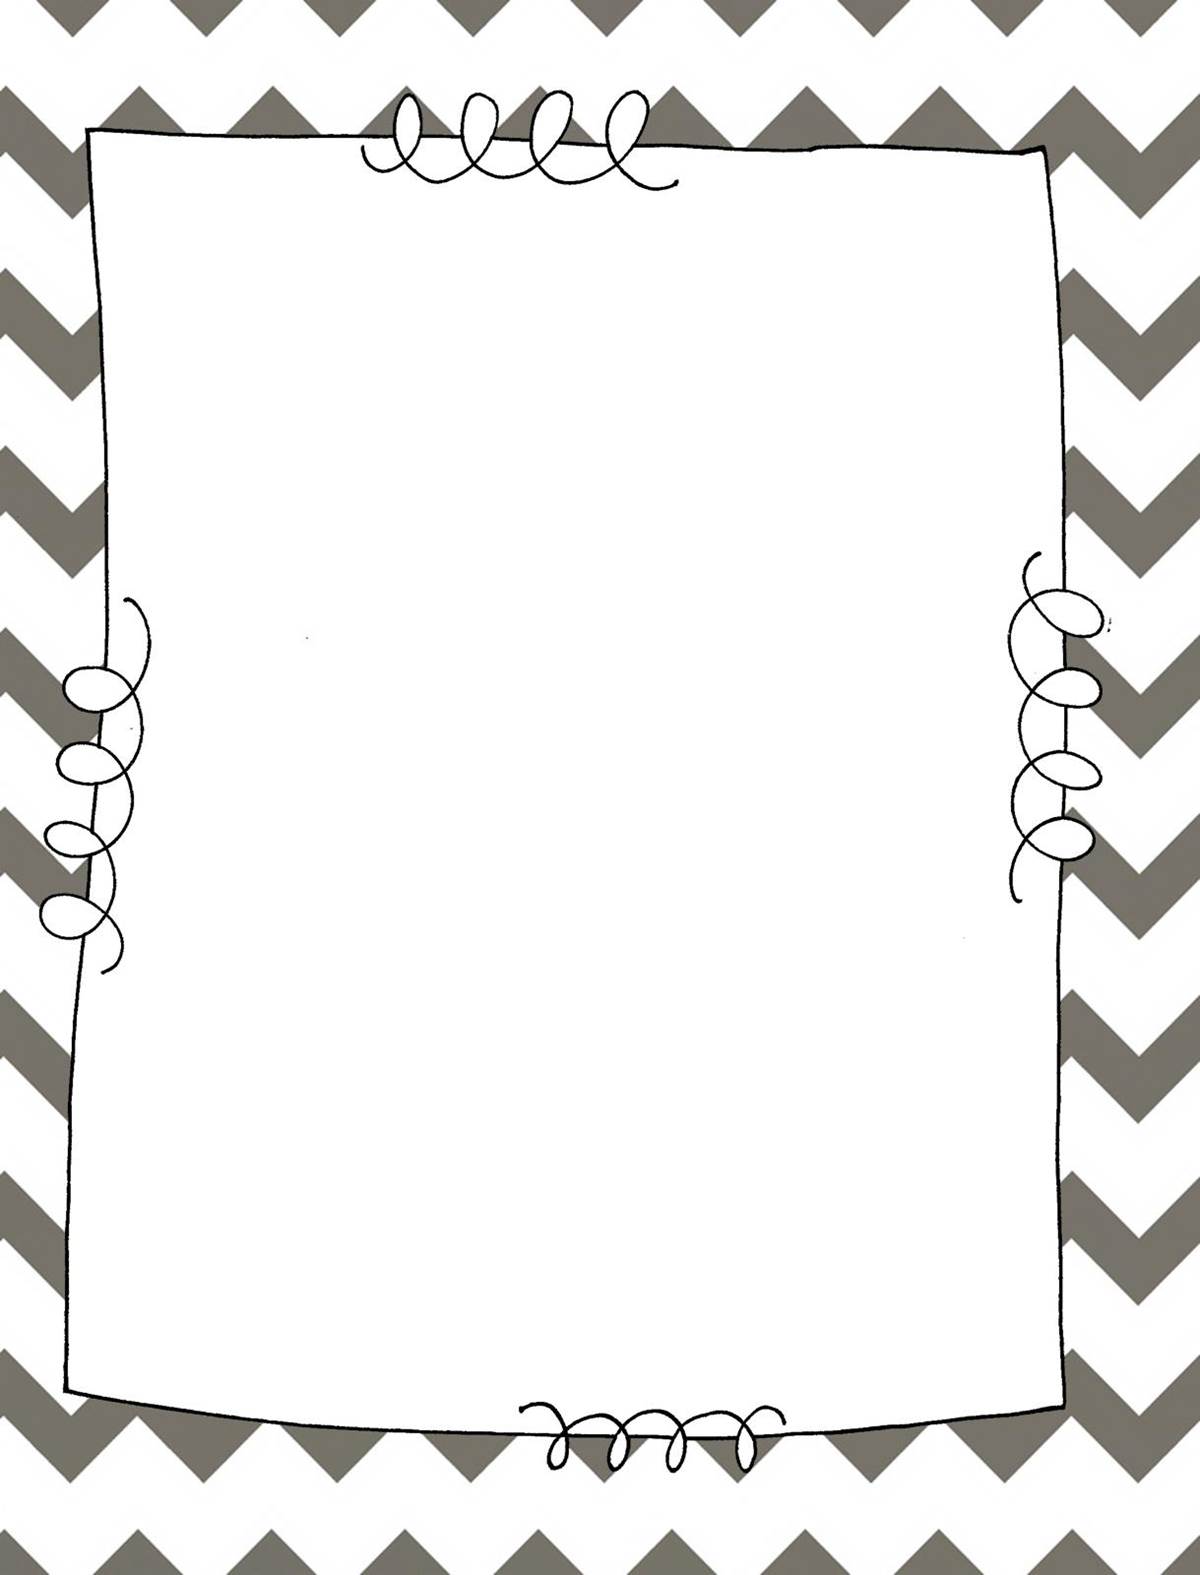 Binder Spines Are Included For 4 Different Sized Binders   The Chevron